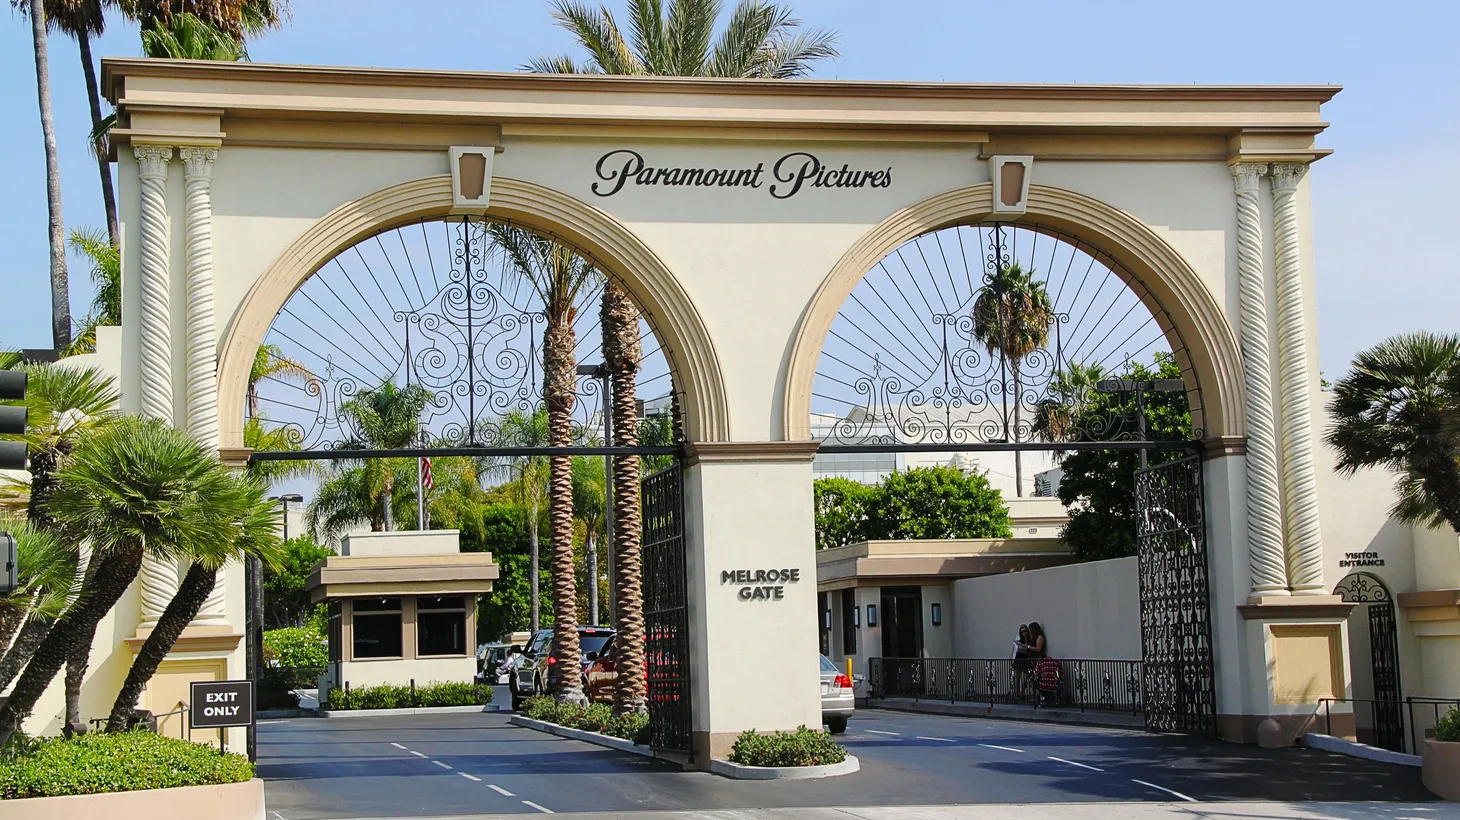 As of this week, Paramount is the new name for the media conglomerate formerly known as ViacomCBS.